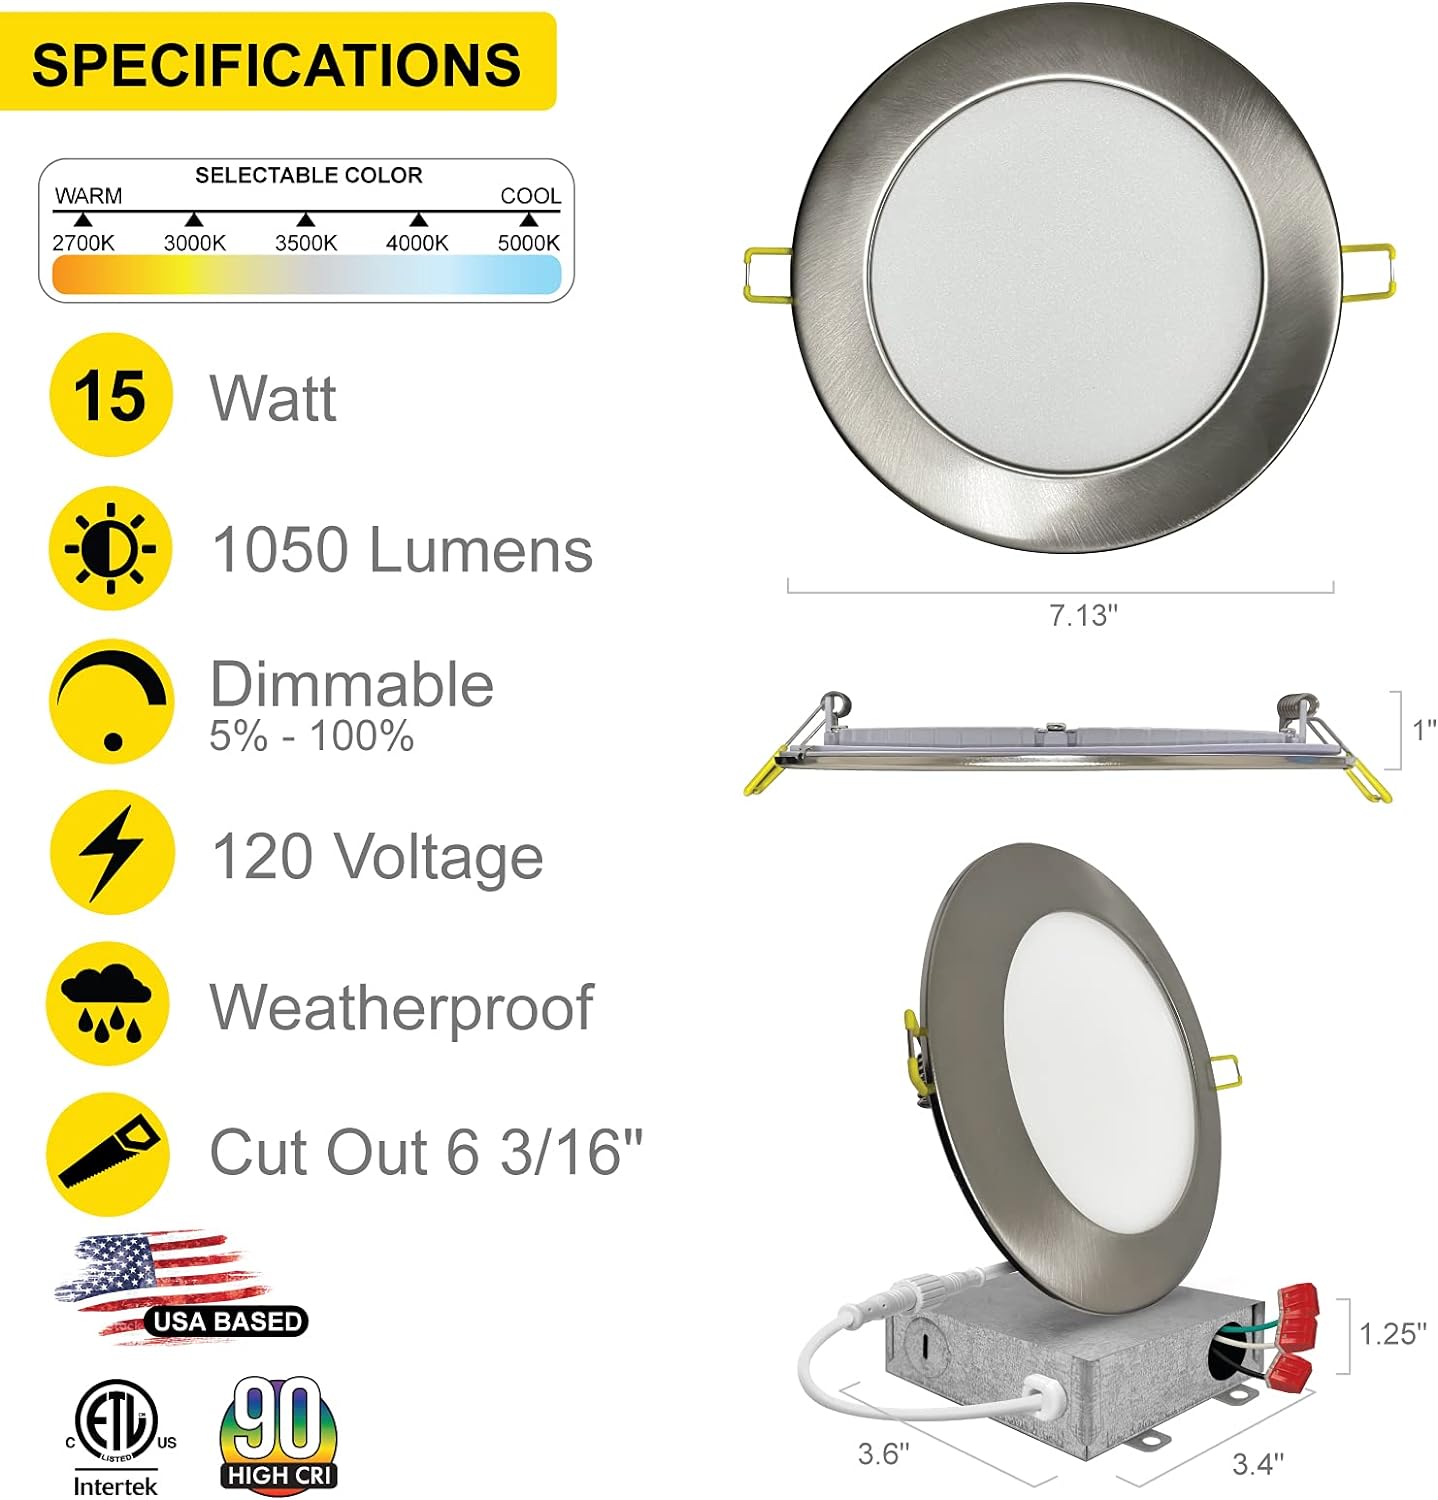 NUWATT | 12 Pack | 6 Inch Ultra-Thin LED Recessed Lighting, Selectable 2700K/3000K/3500K/4000K/5000K, High Brightness 1050 Lumens, Dimmable, IC Rated Brushed Nic